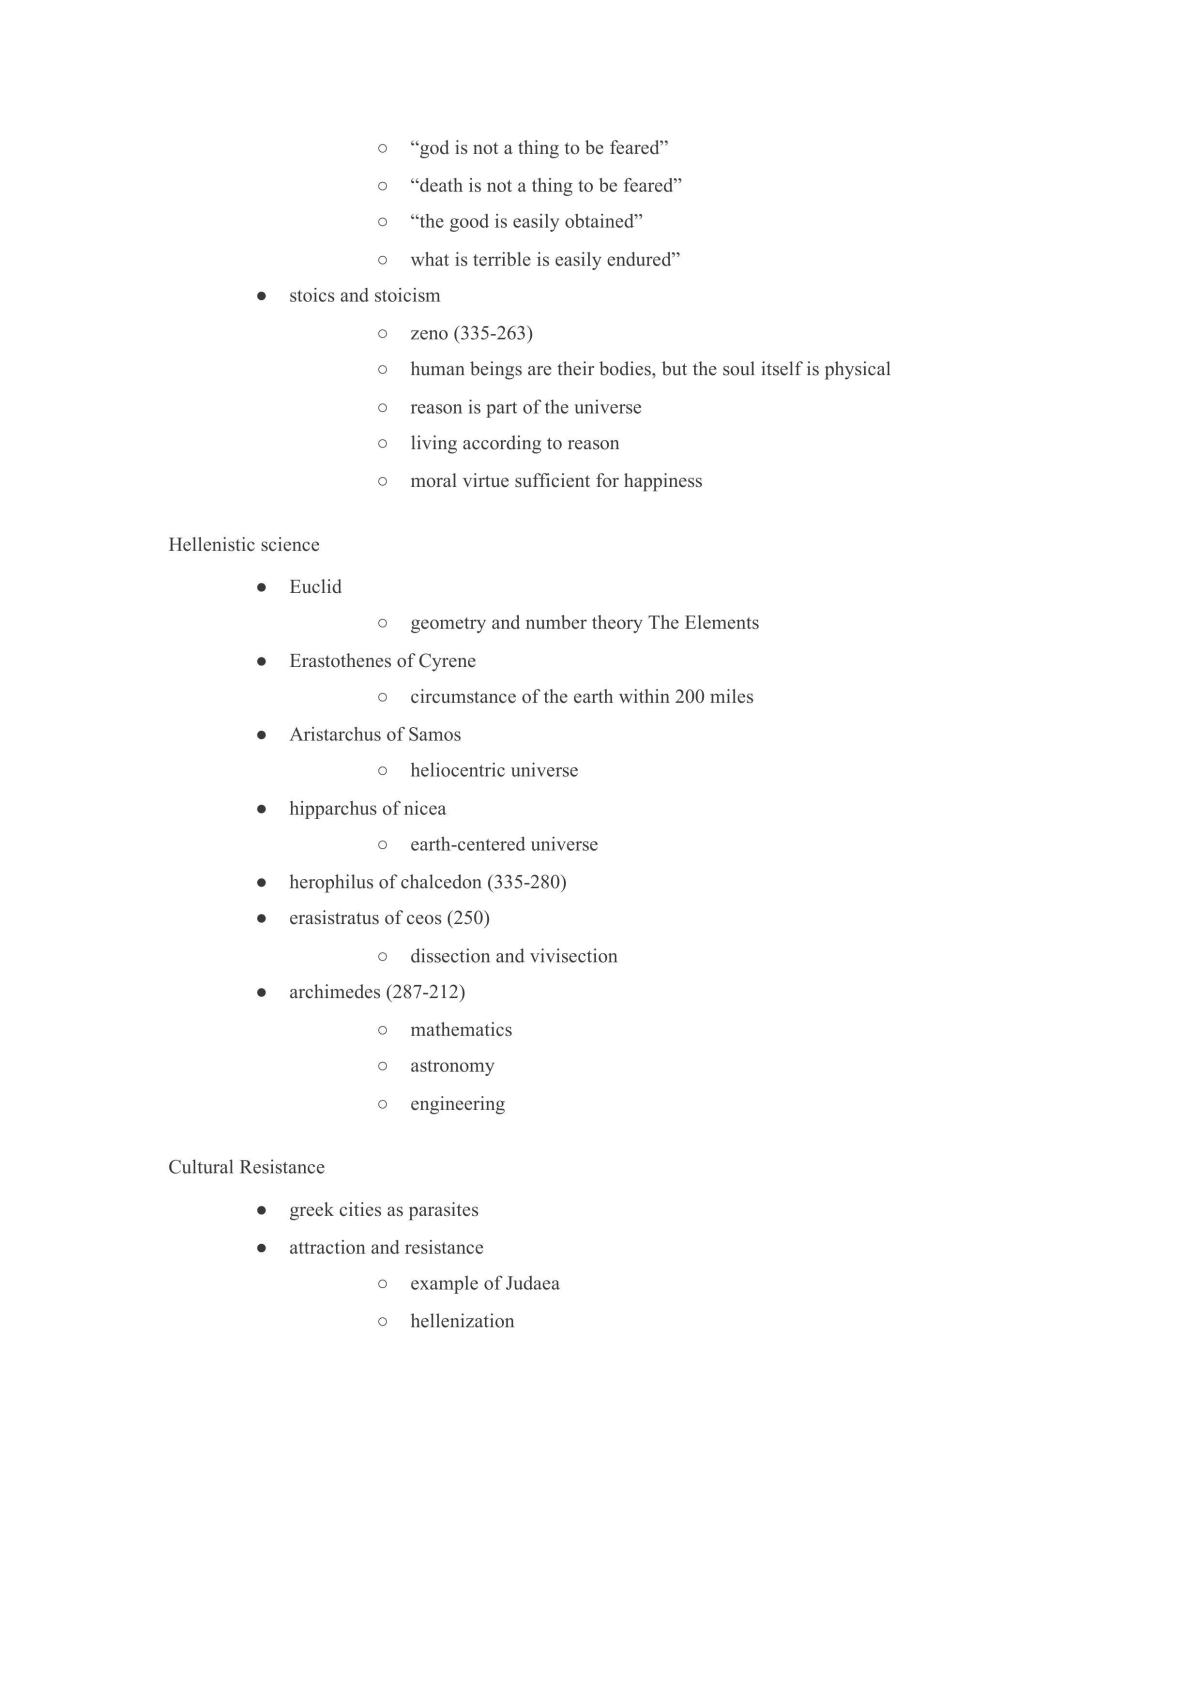 Completed Study Guide - Page 45